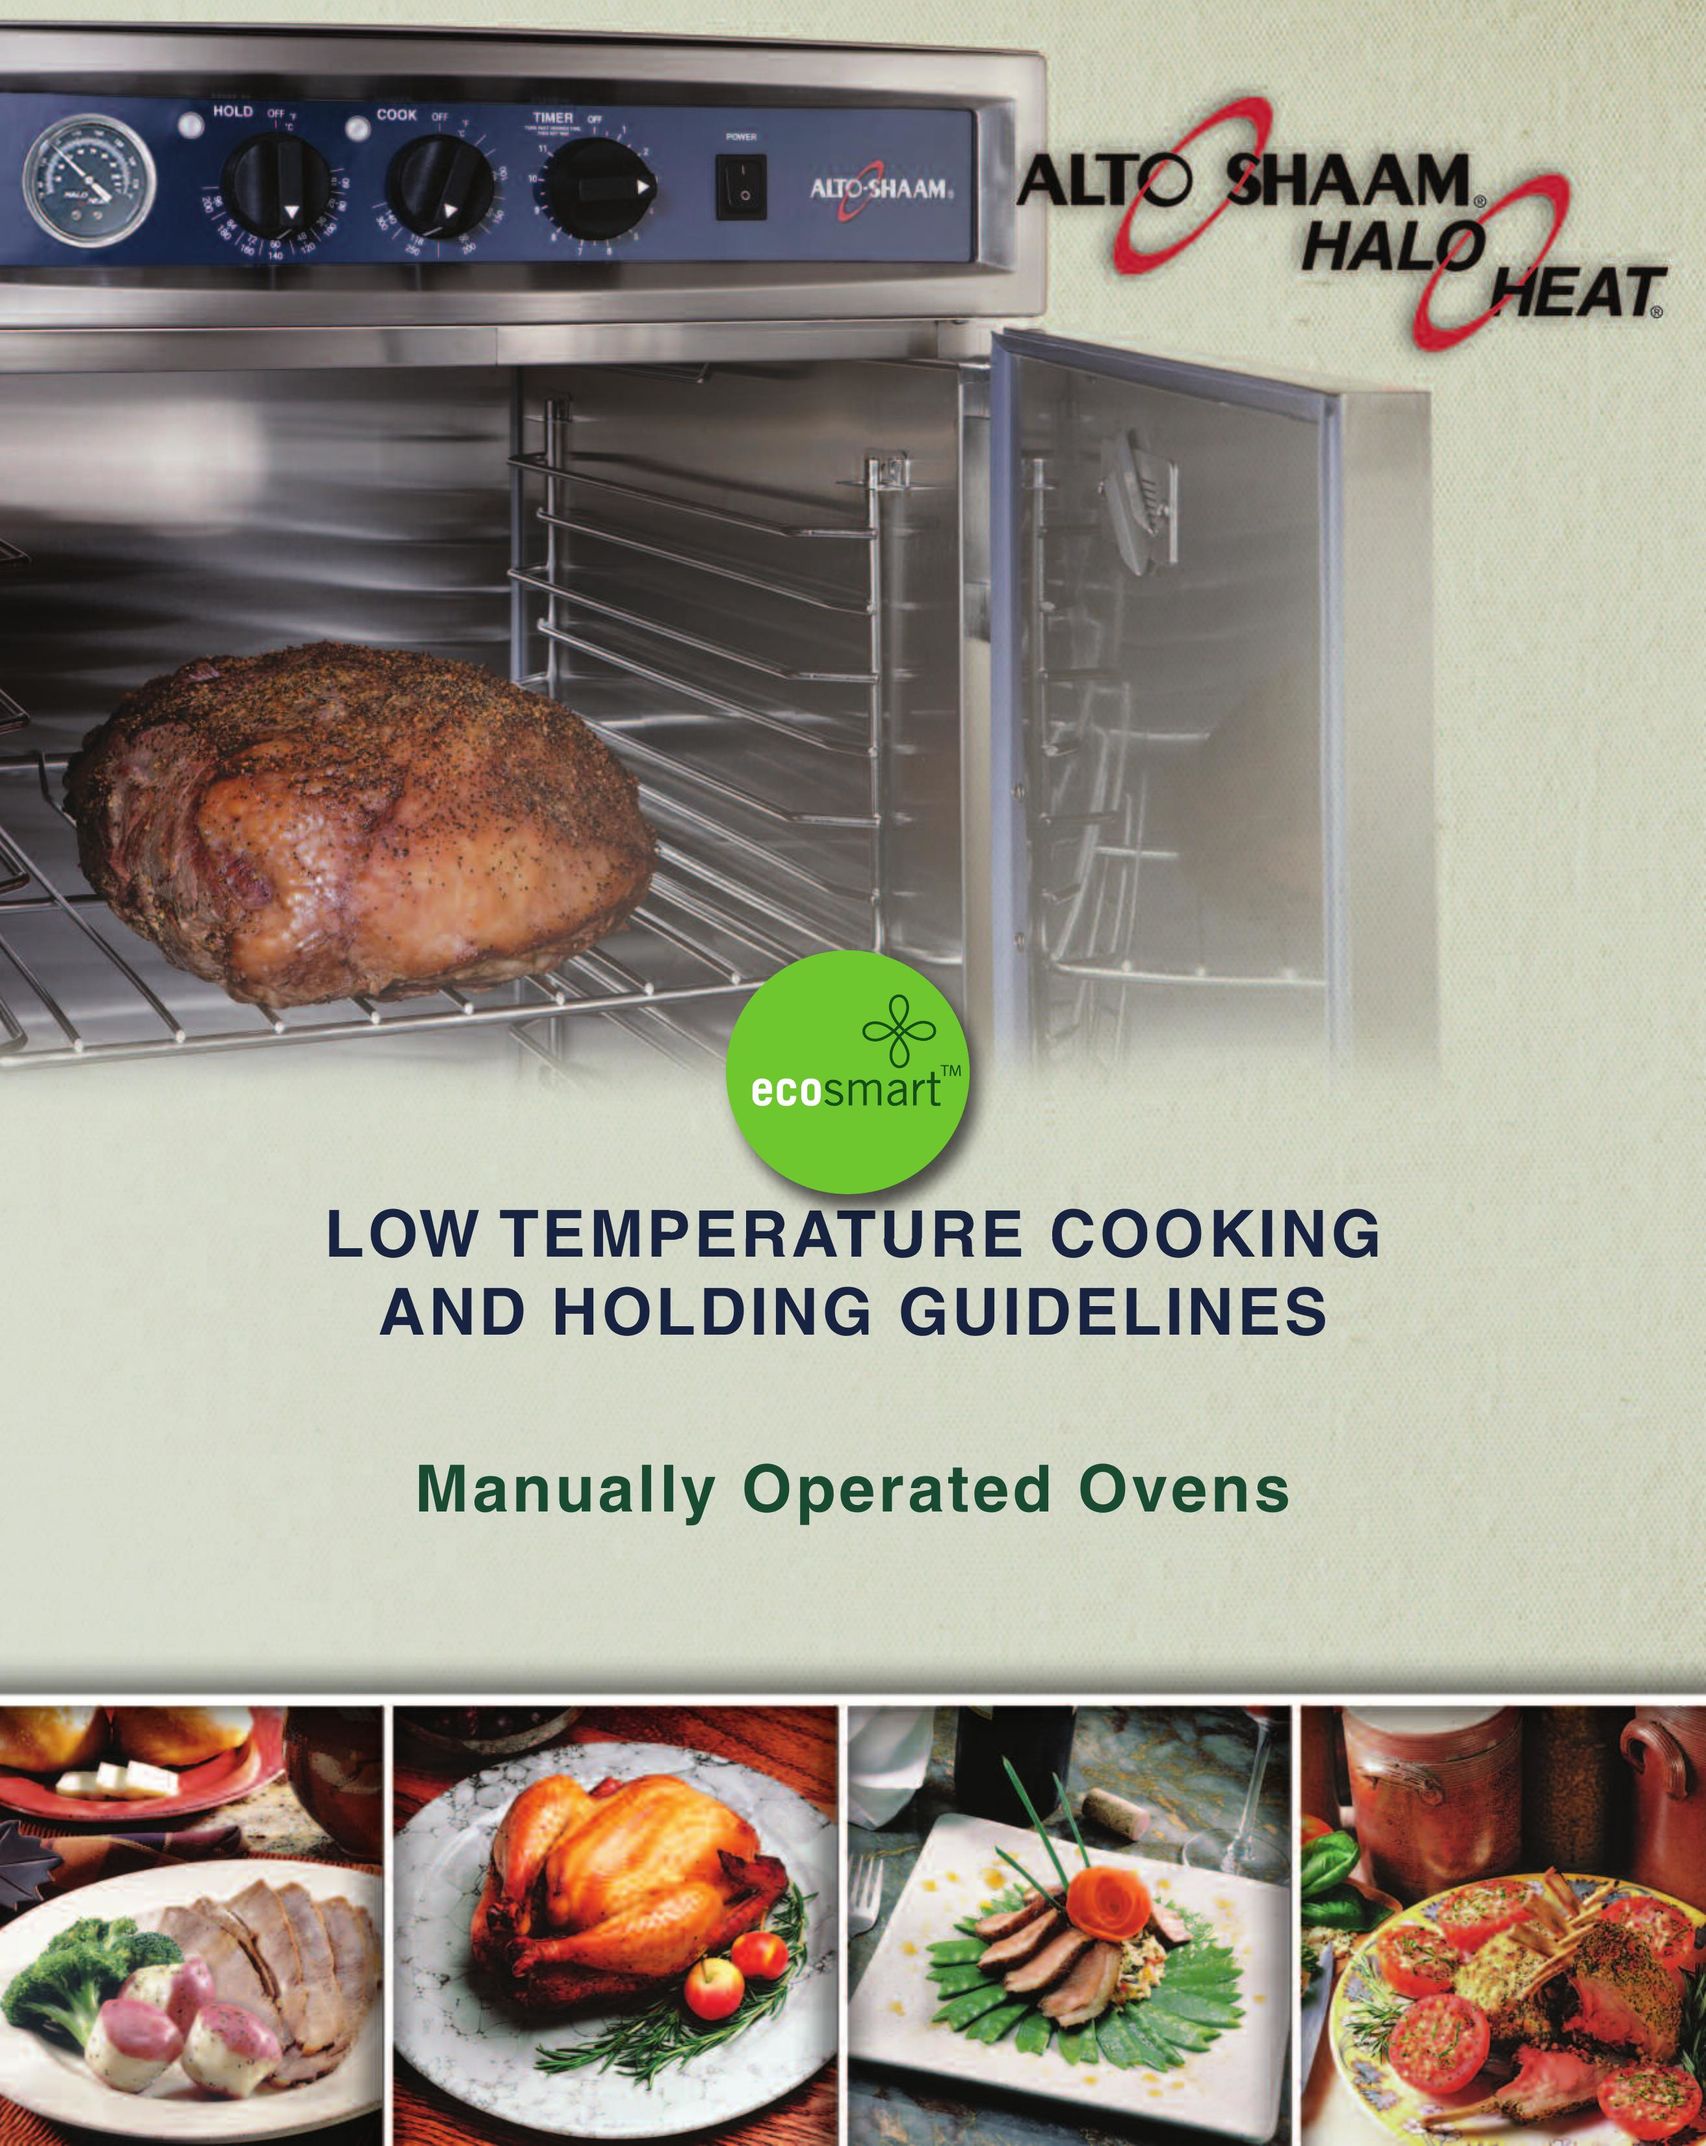 Alto-Shaam 1000-TH SERIES Oven User Manual